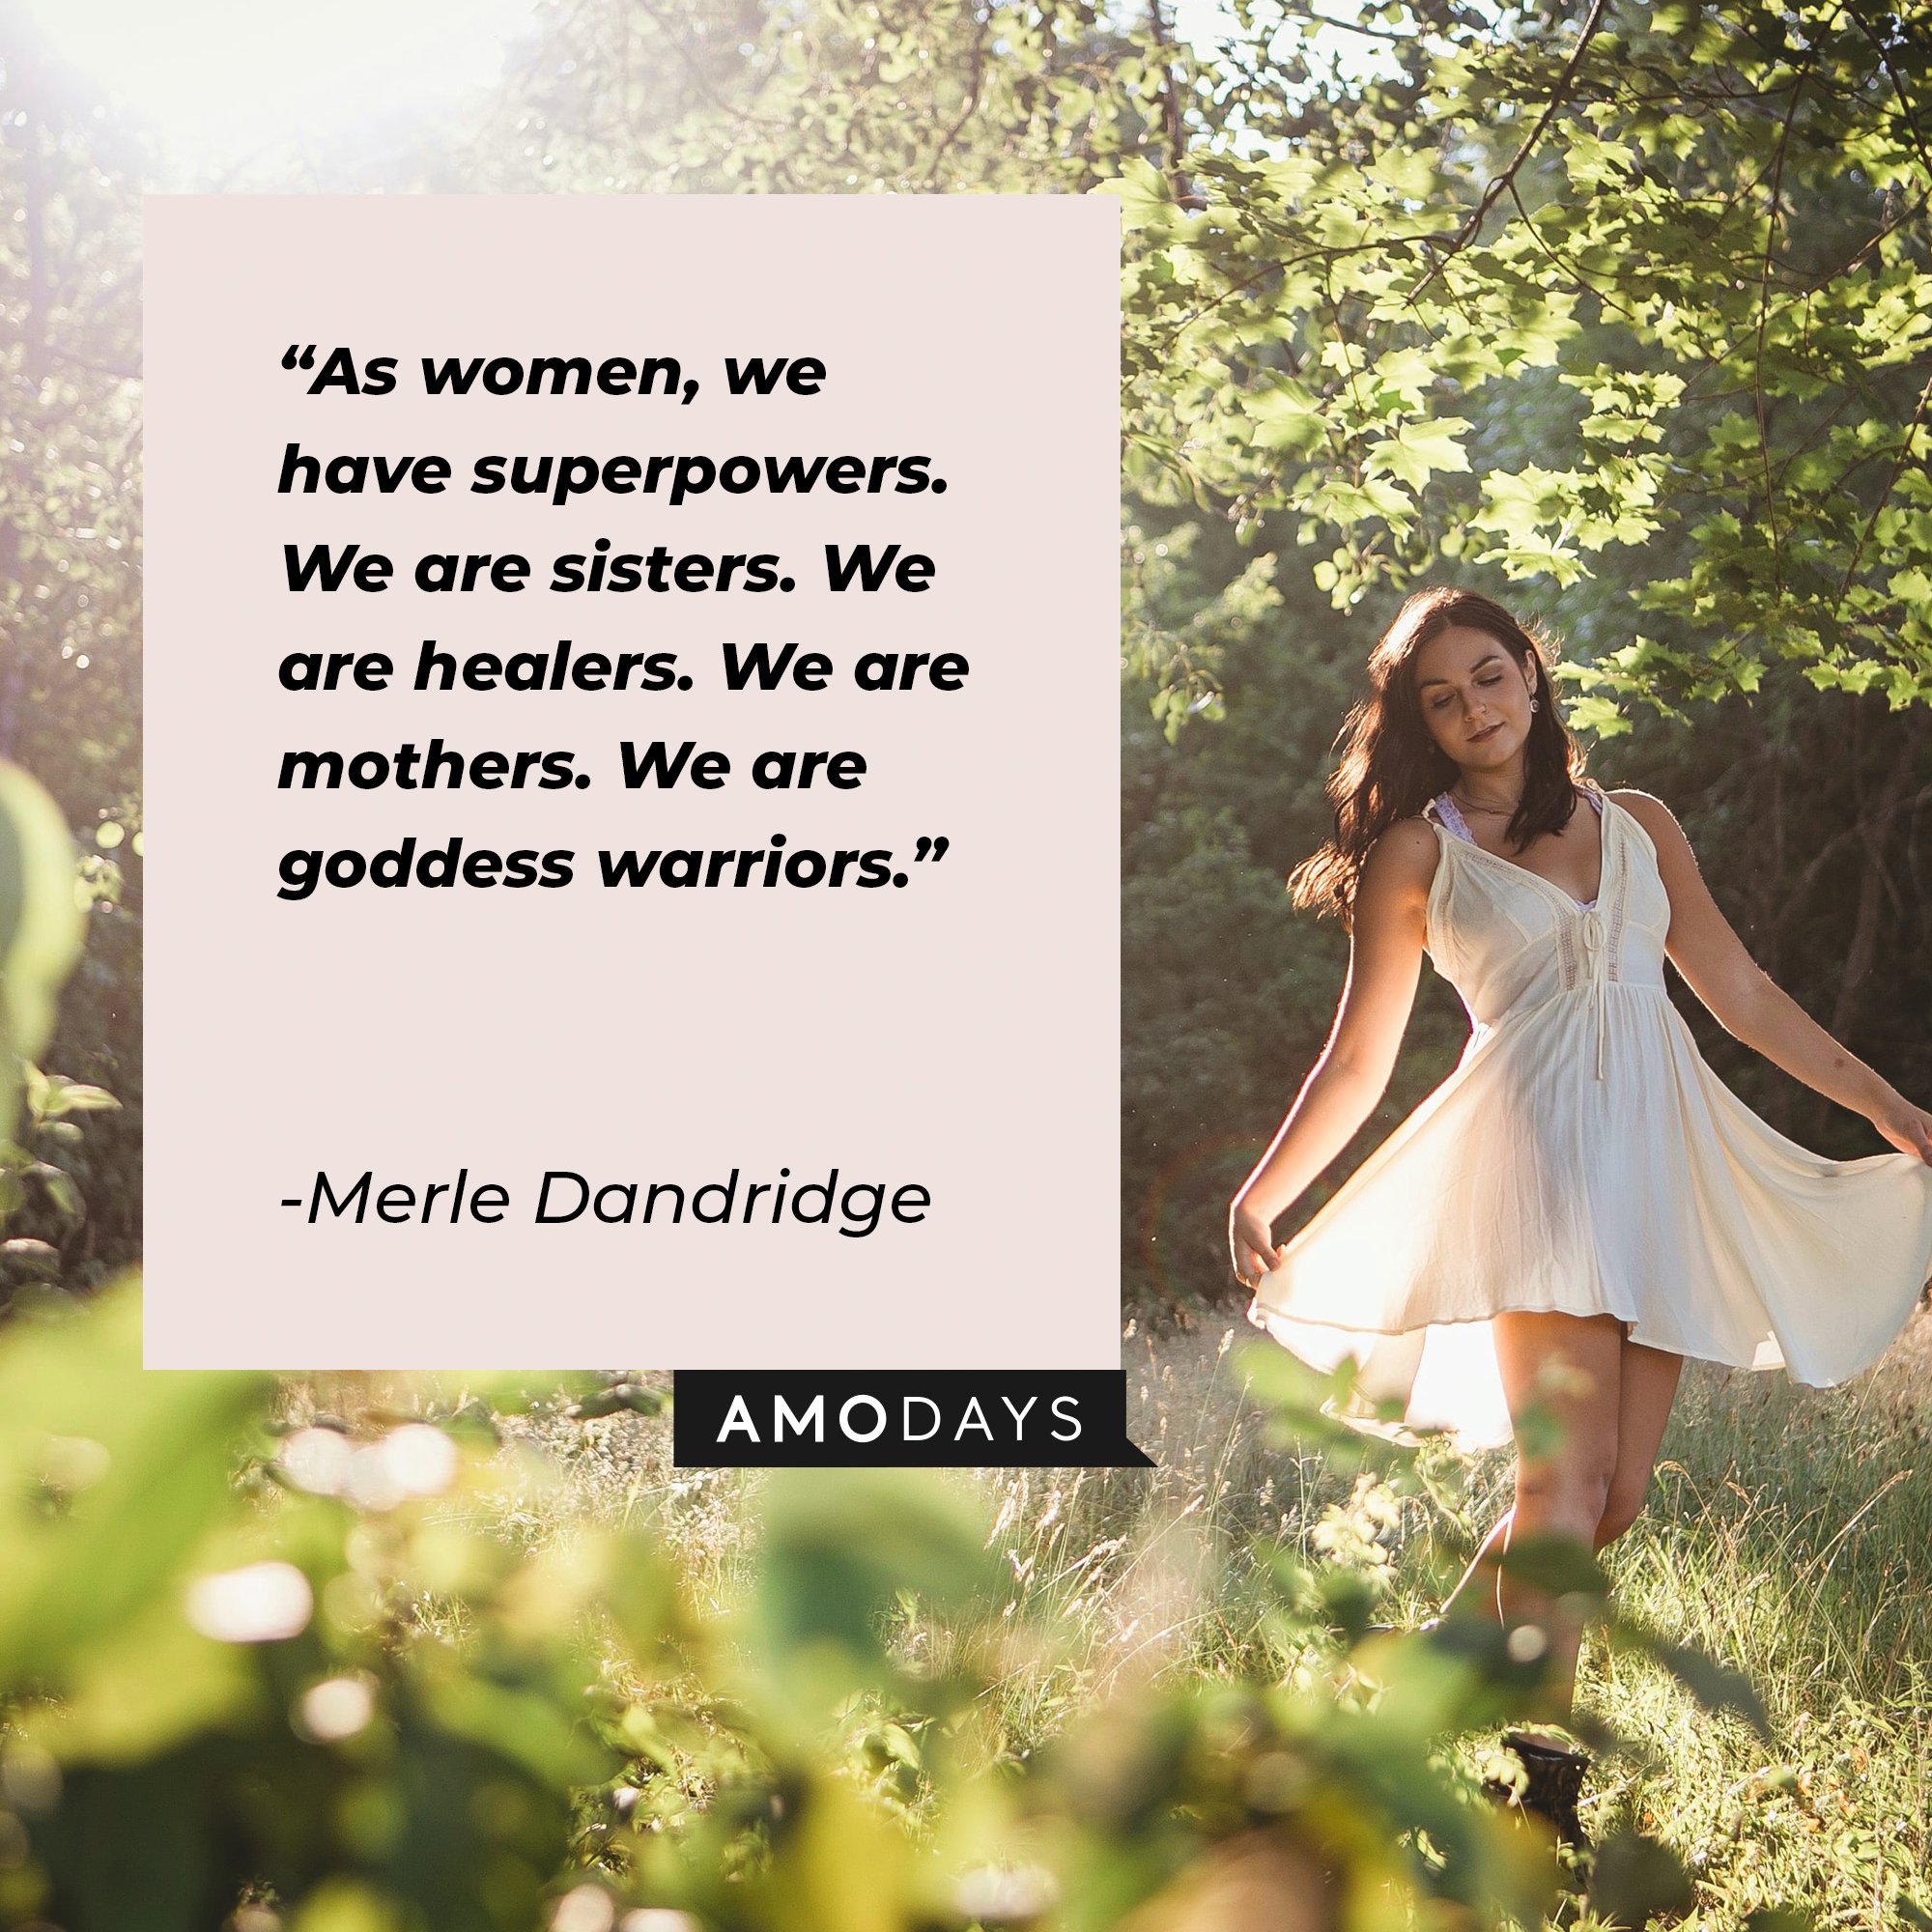 Merle Dandridge’s quote: "As women, we have superpowers. We are sisters. We are healers. We are mothers. We are goddess warriors." | Image: AmoDays